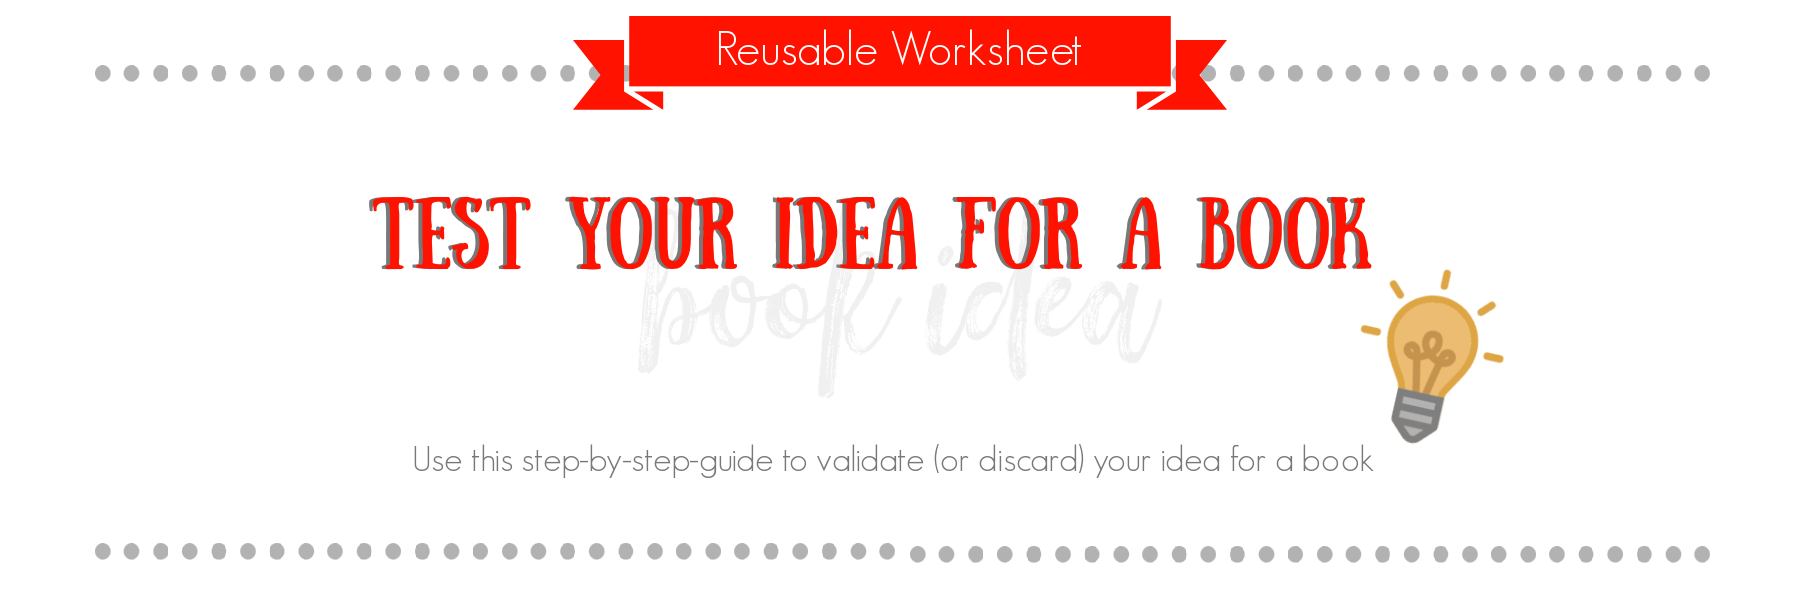 Worksheet: Test your idea for a book